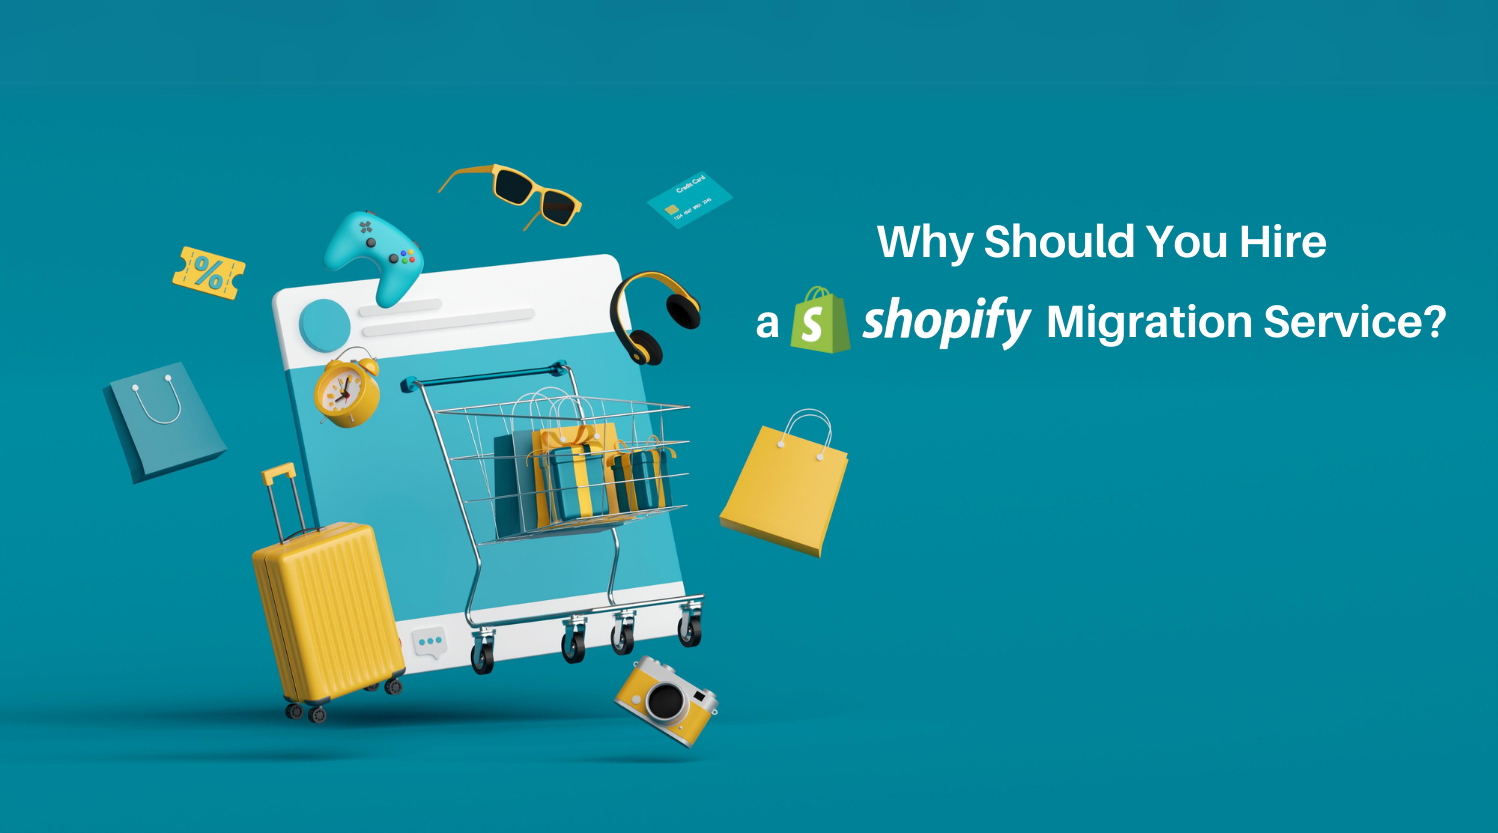 Why Should You Hire a Shopify Migration Service?